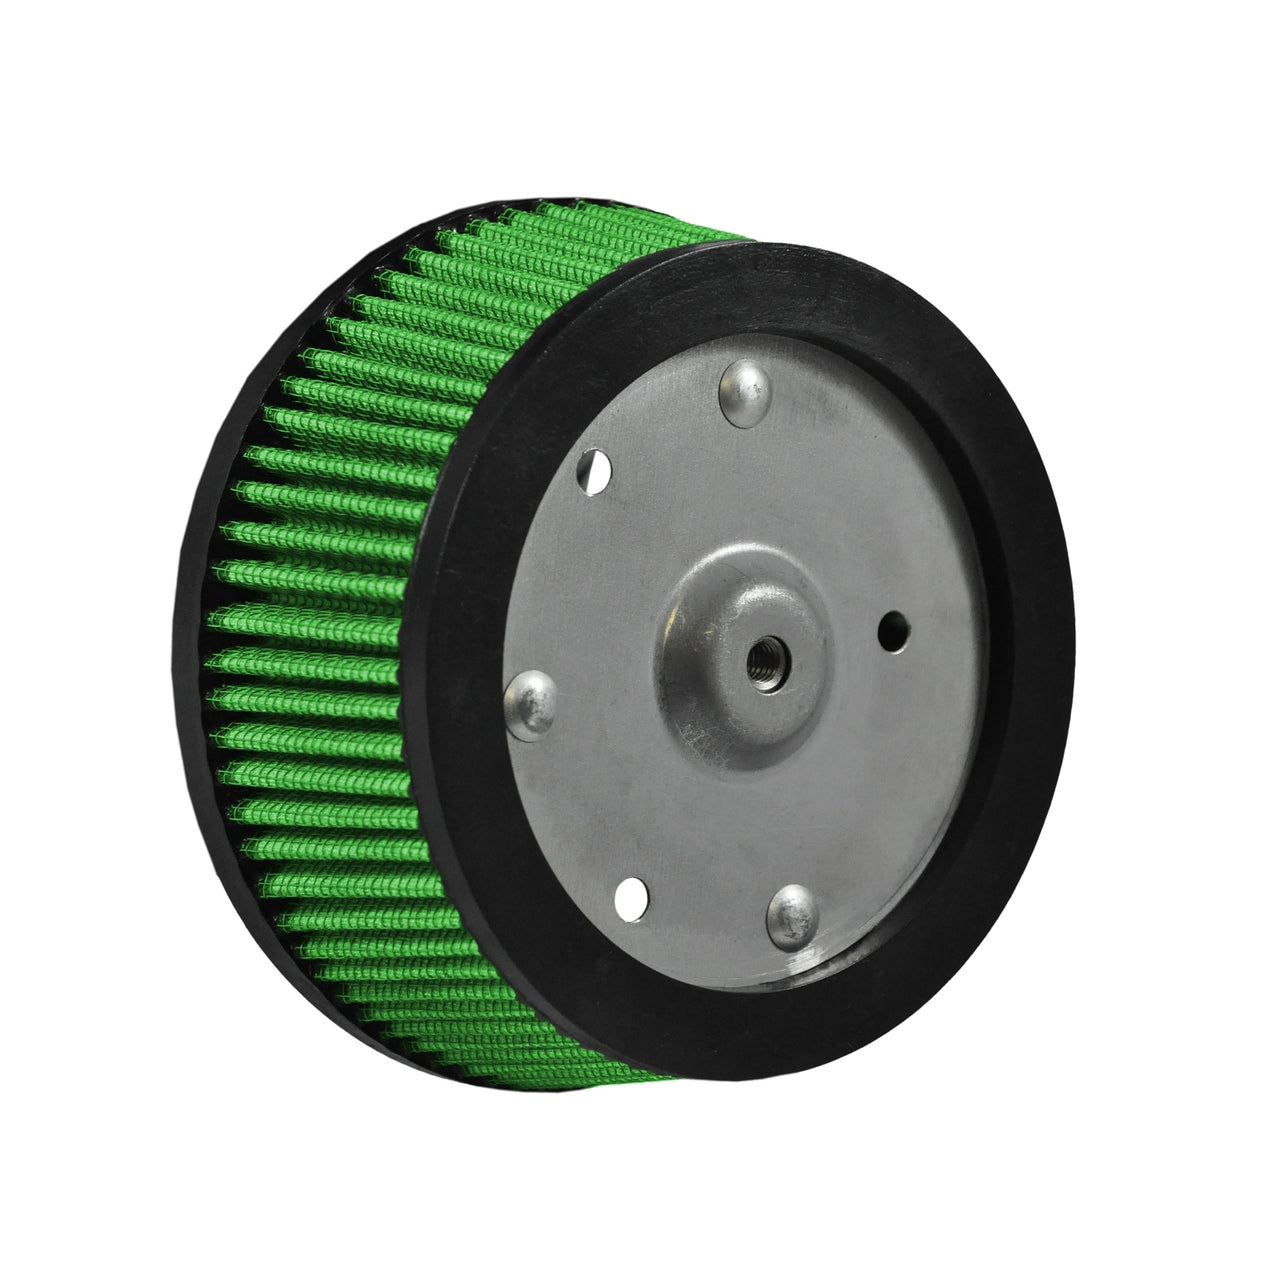 Green Filter 2008 Harley Screaming Eagle 3-Bolt Filter - ID 5.41in / B 6.48in / Top 5.64in / H 2.5in